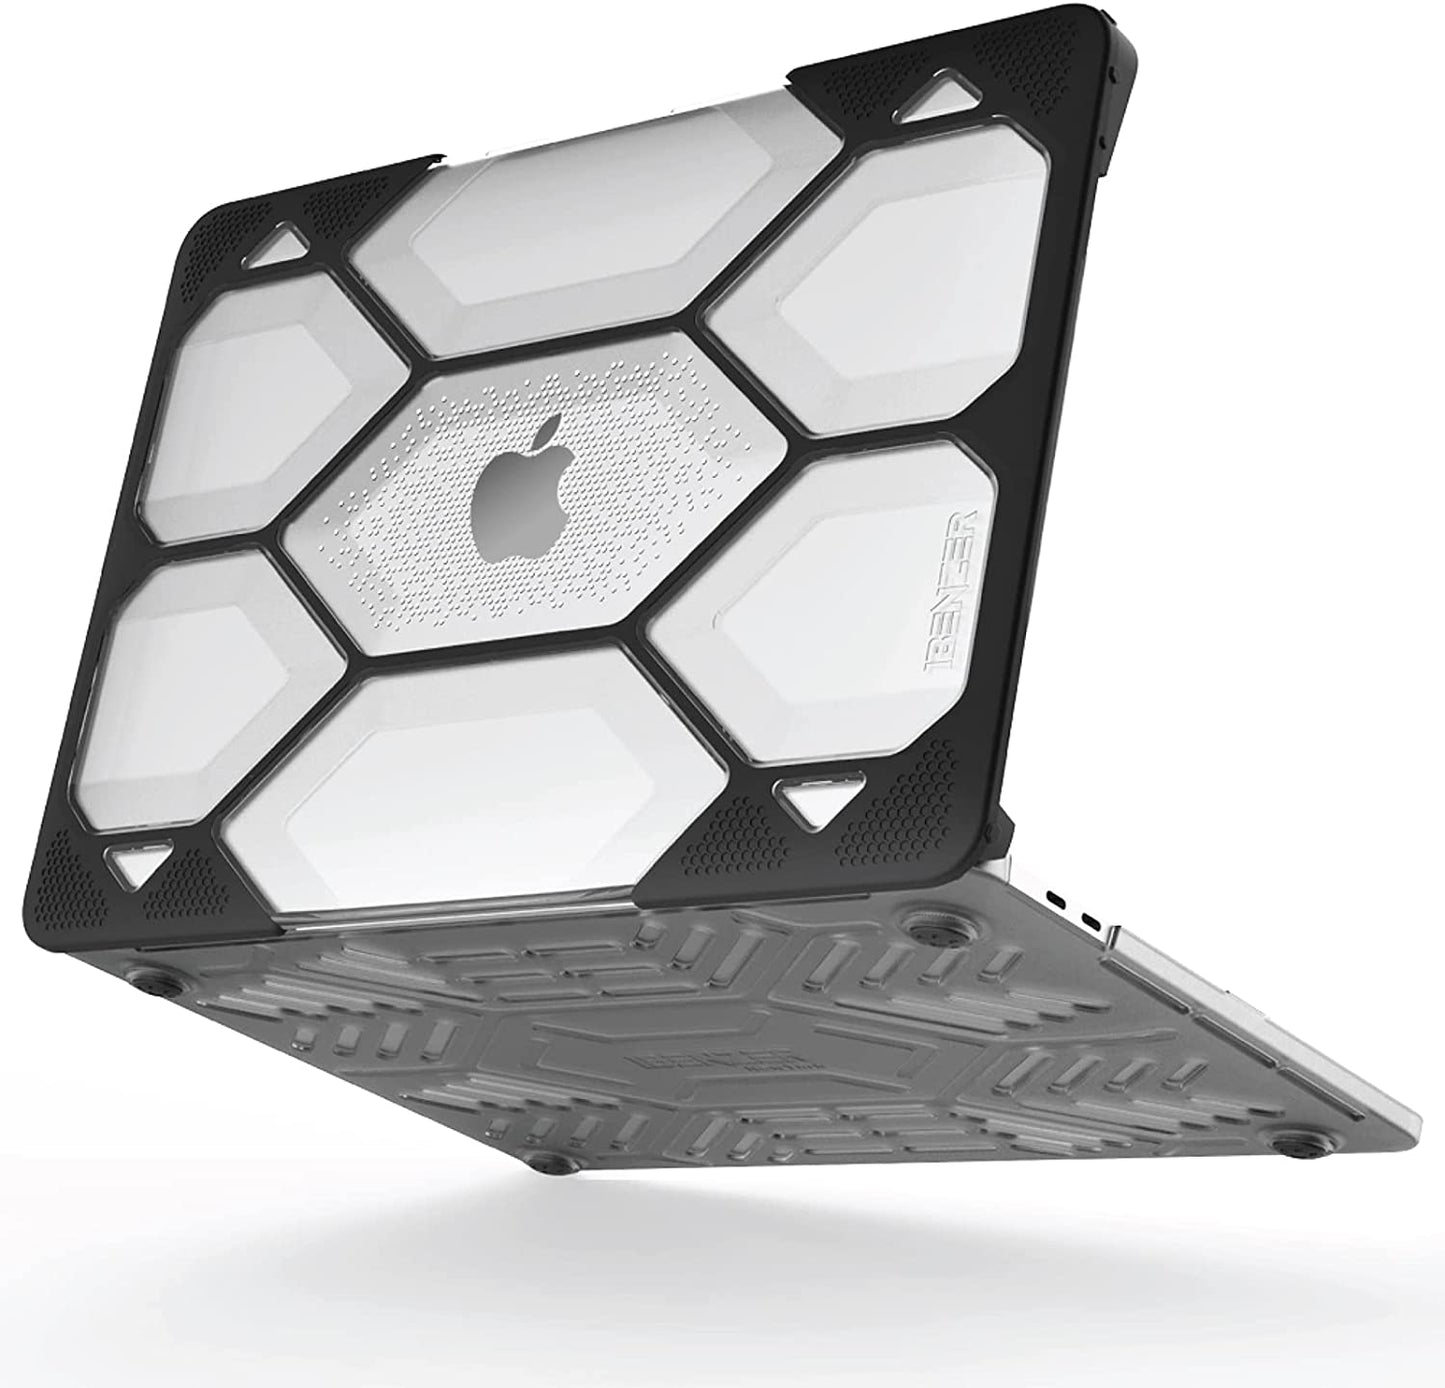 IBENZER Hexpact Protective Case for Macbook Pro 13’’ 2012-2015